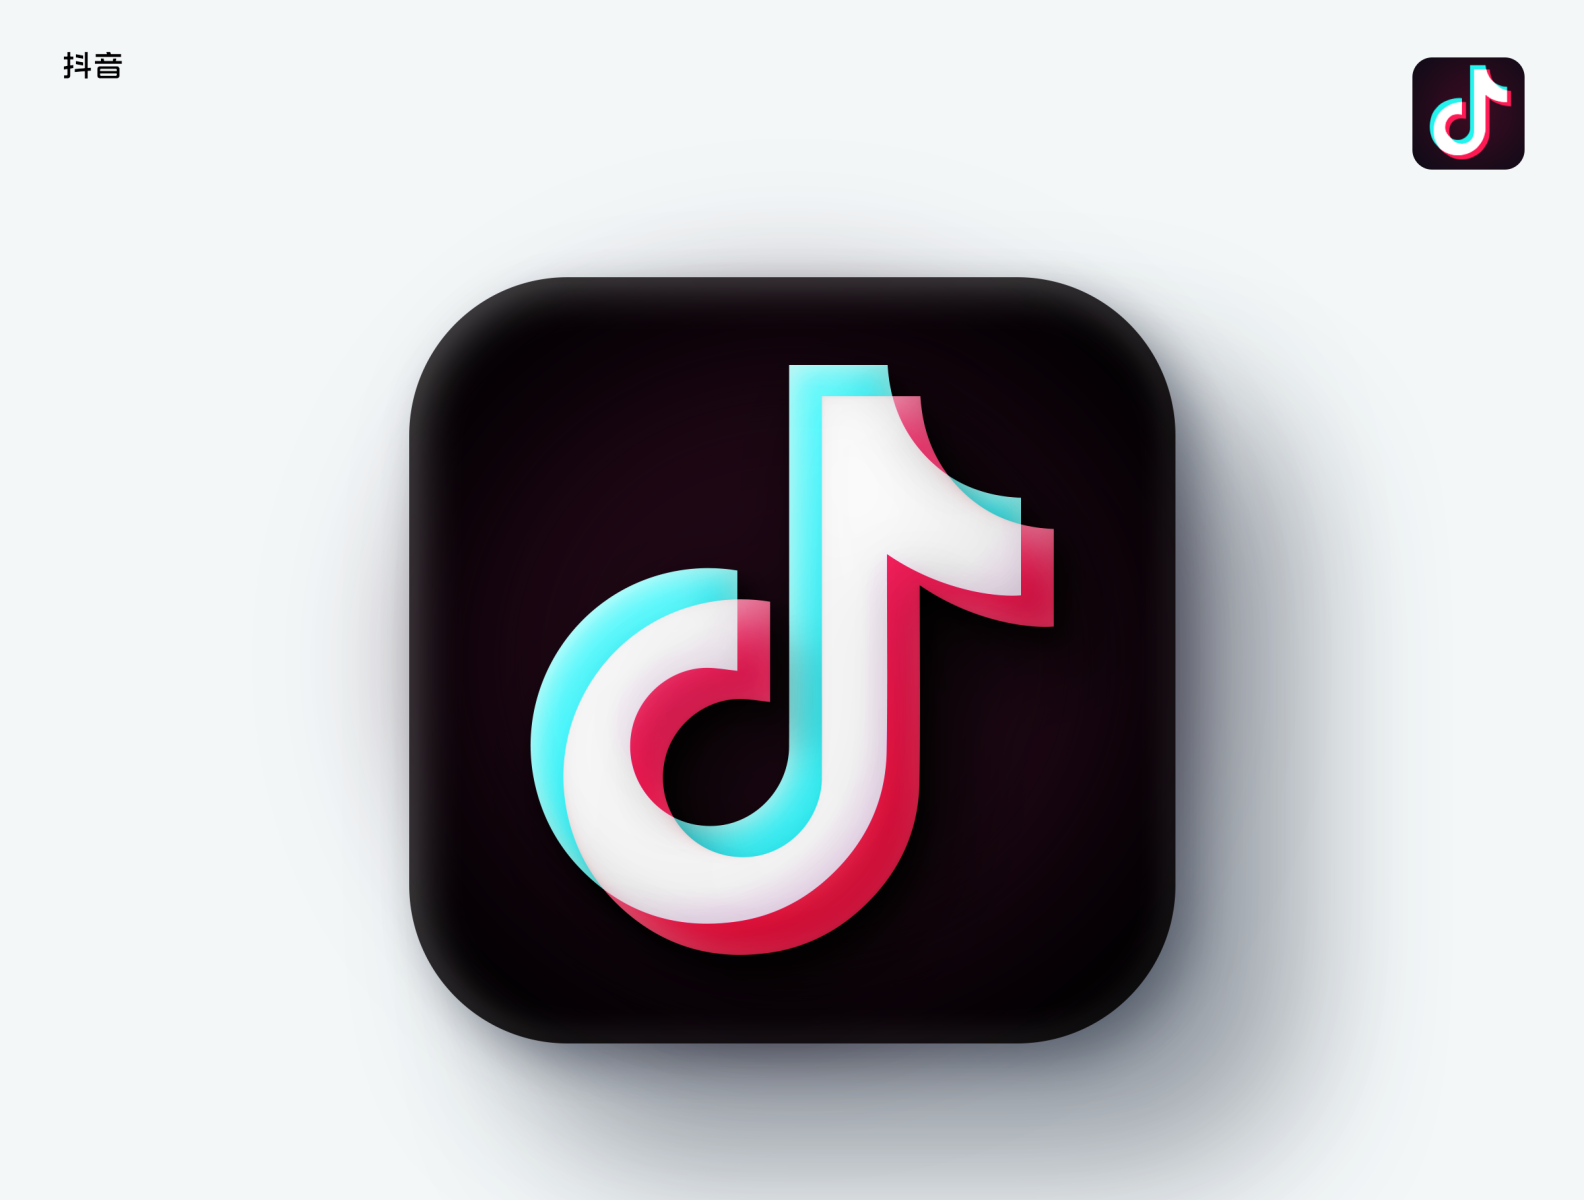 Tik Tok Icon In macOS Big Sur Style by Eric Ji on Dribbble